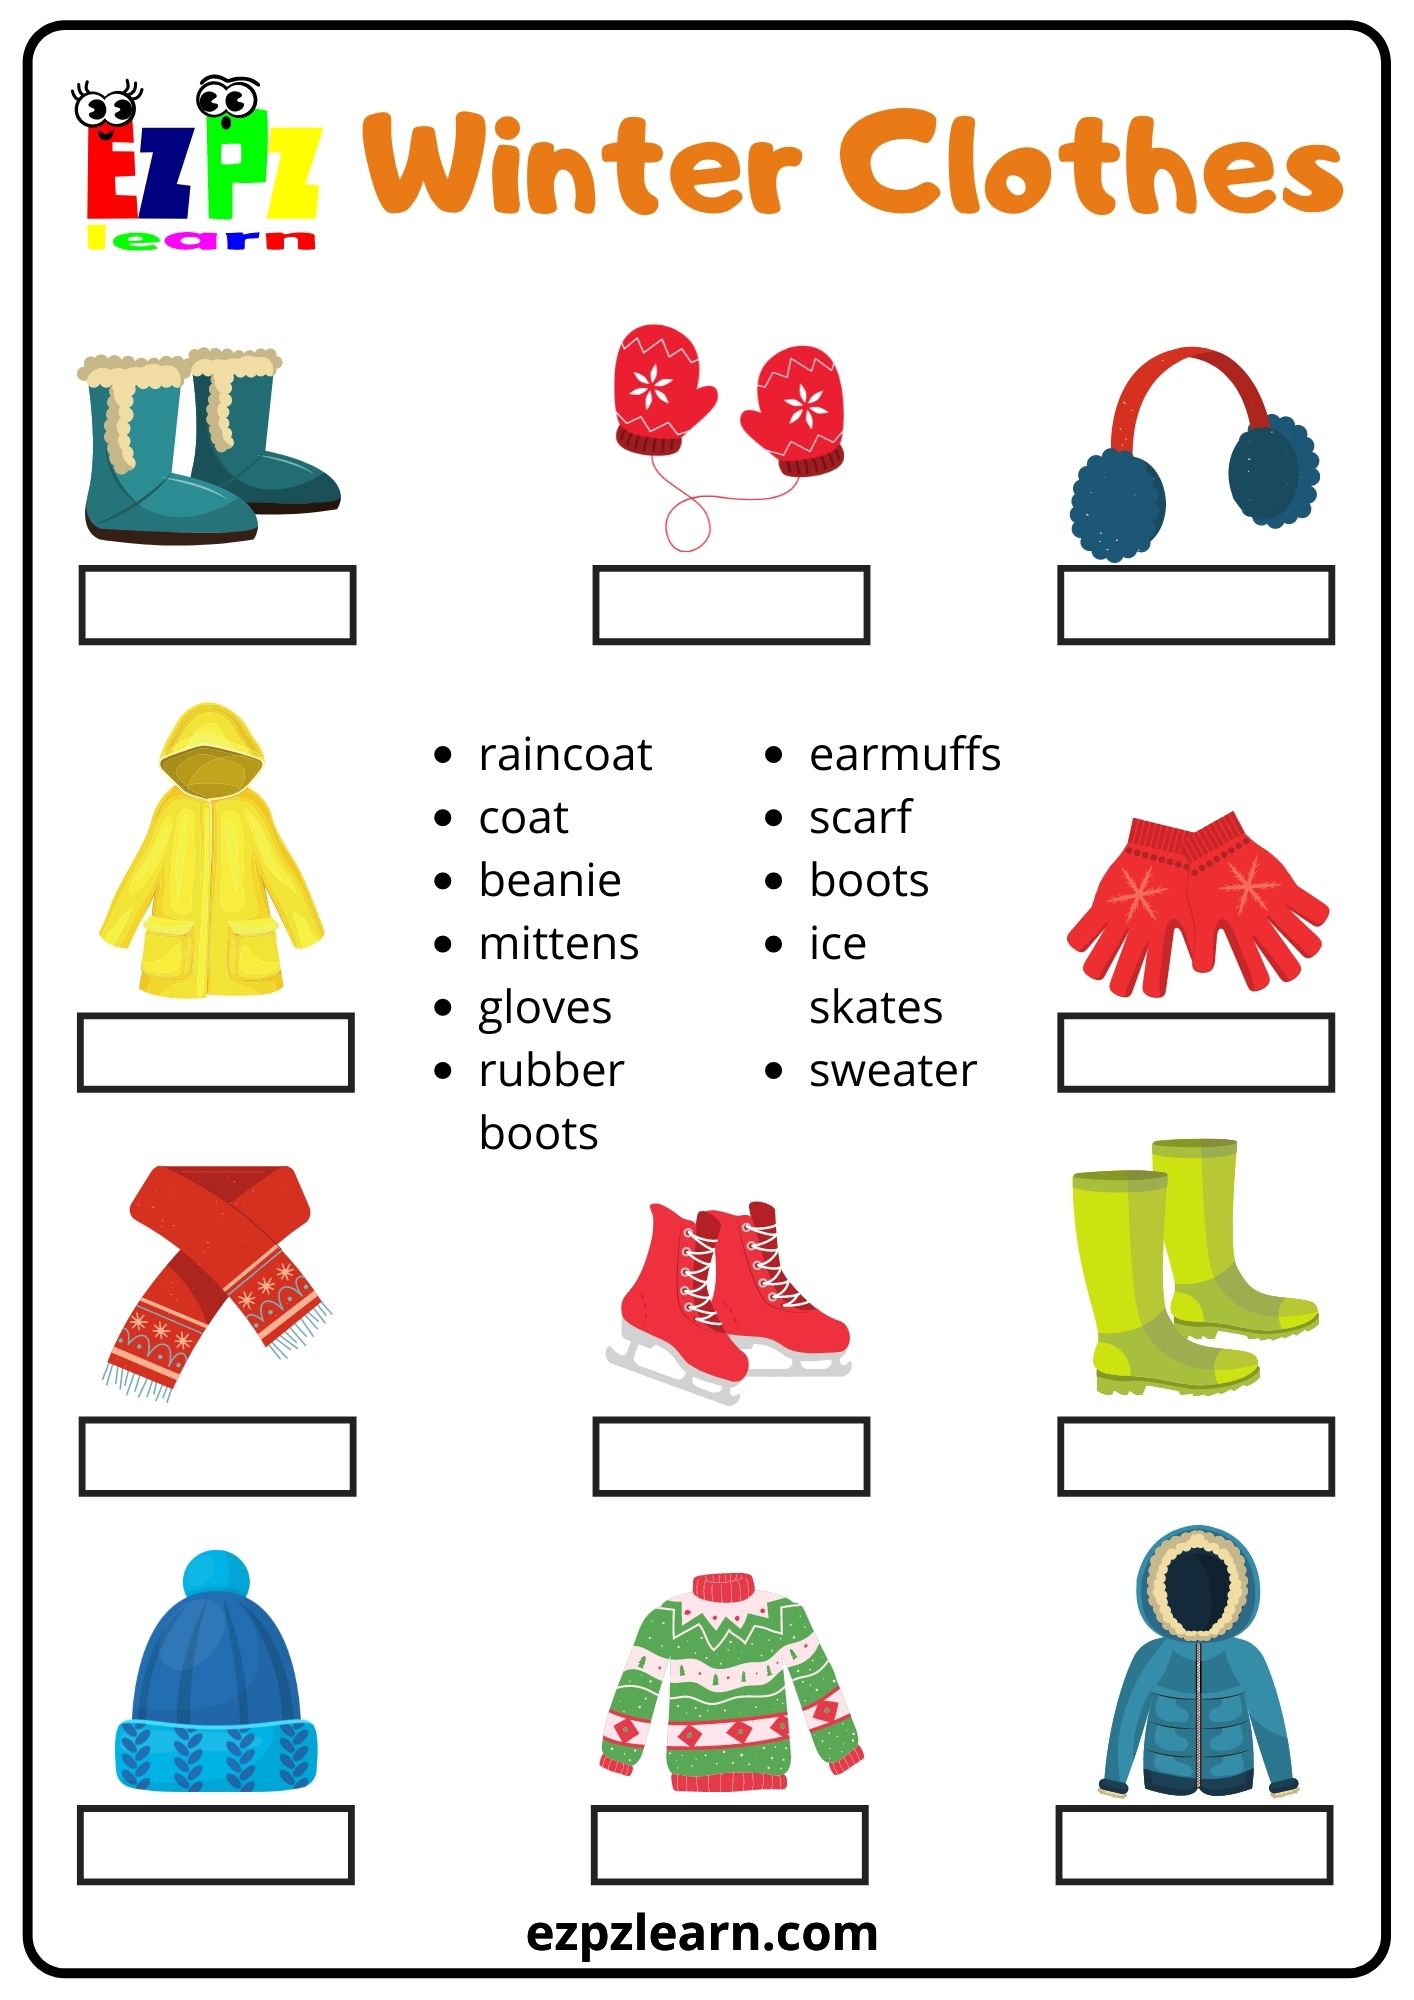 Winter's clothes vocabulary in English, English vocabulary